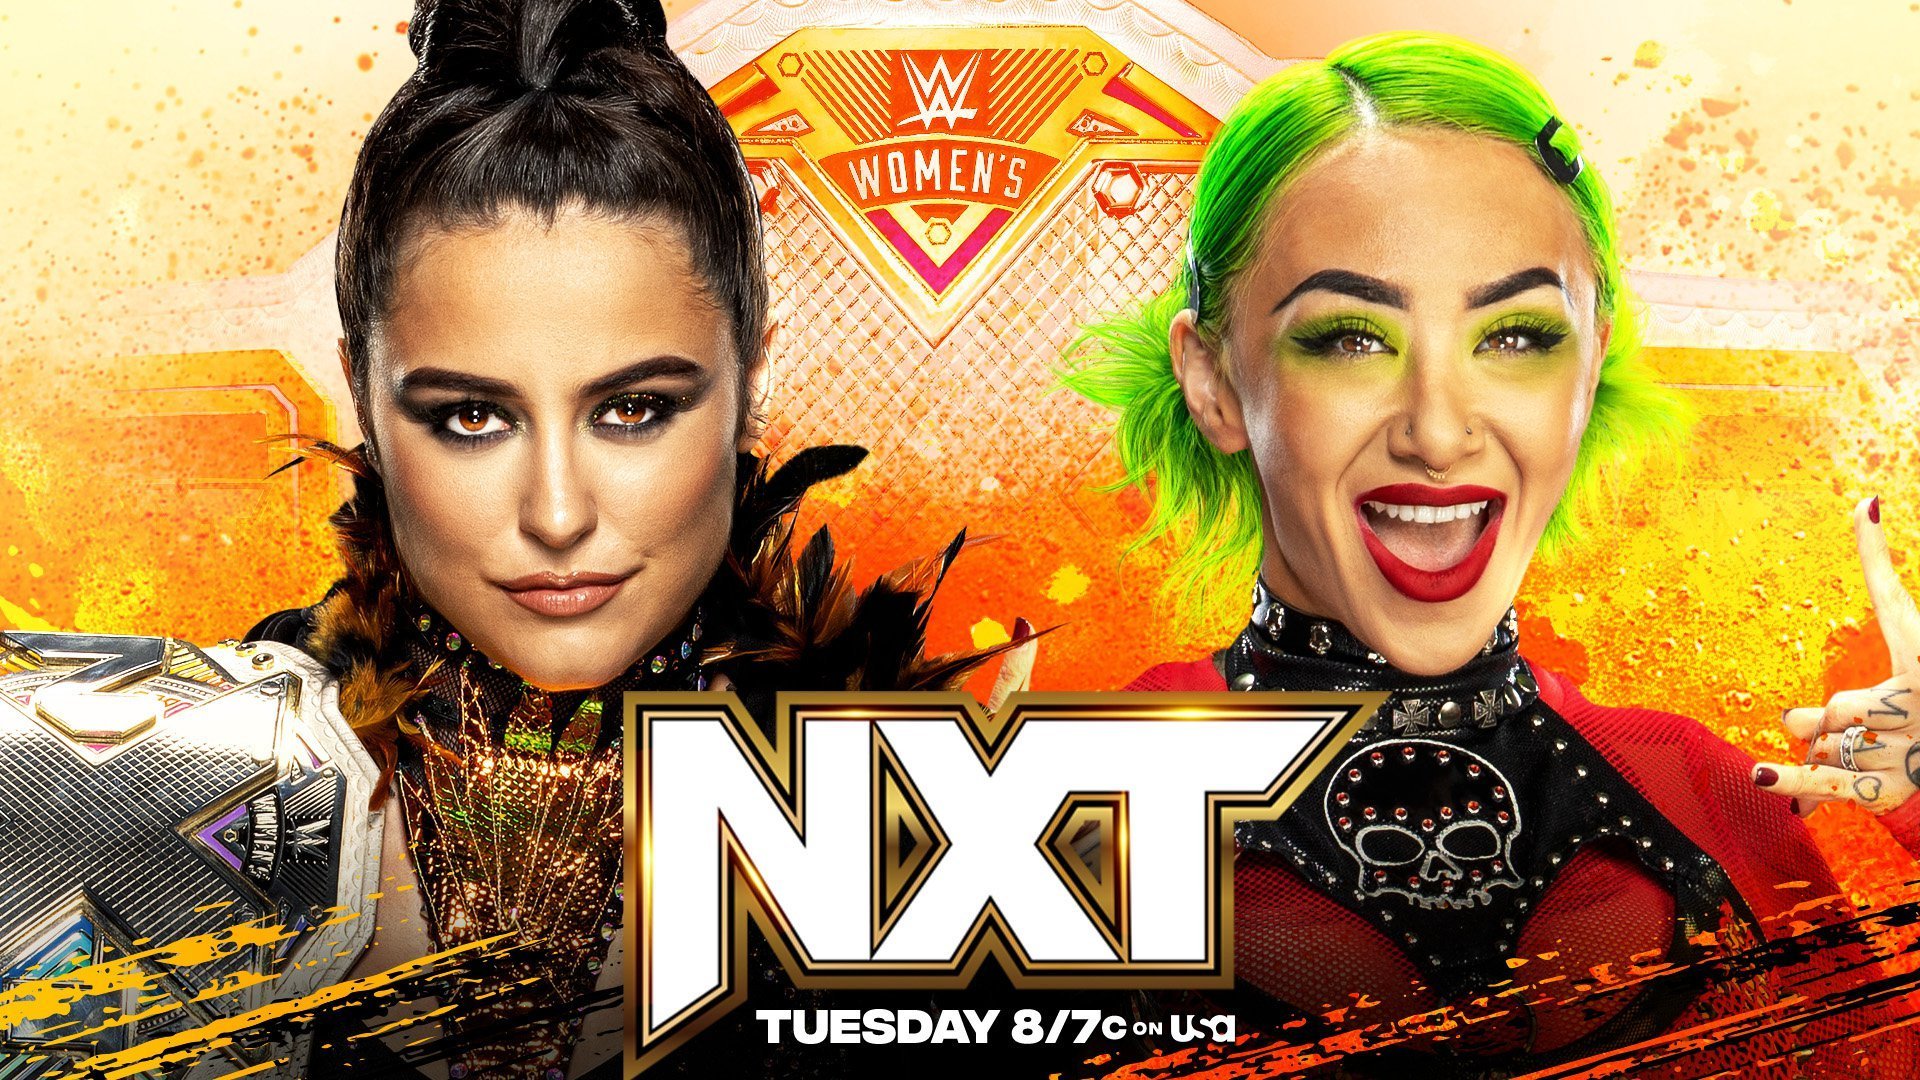 Get a Sneak Peek of the Upcoming Episode of WWE NXT